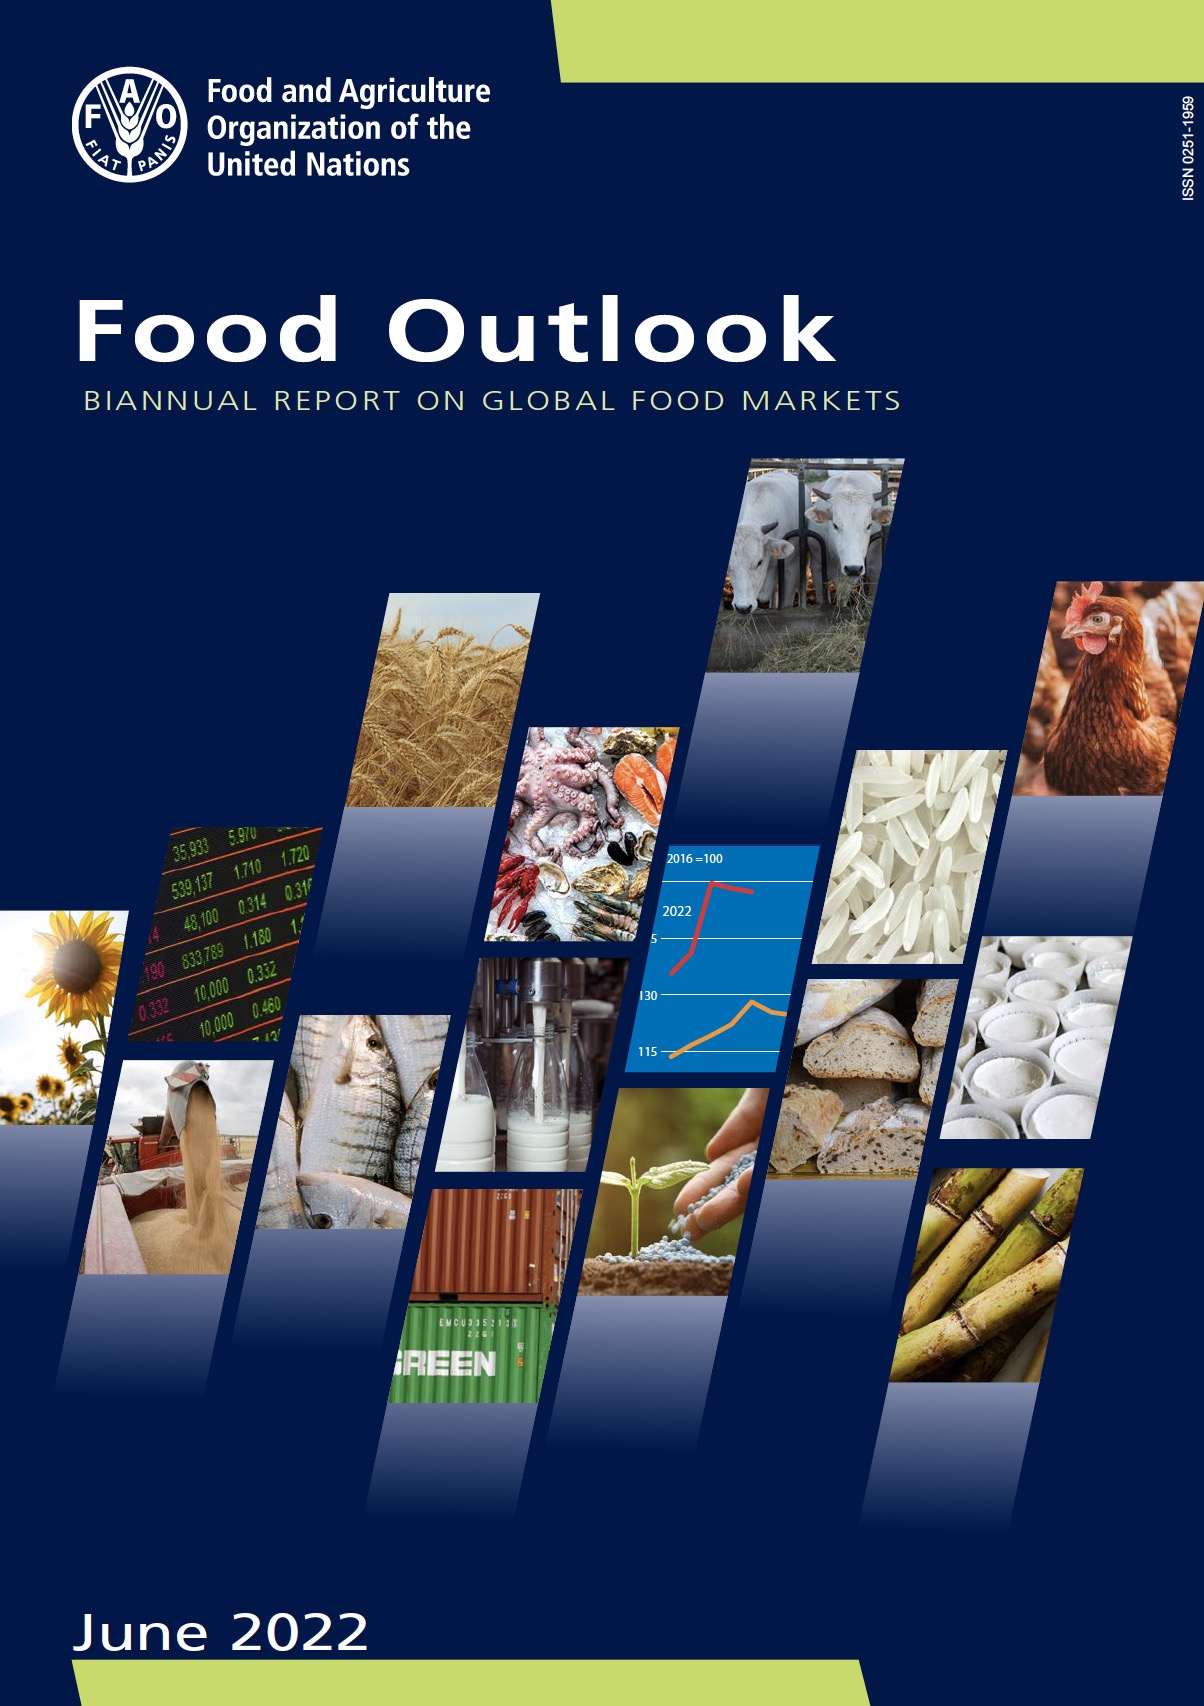 Food Outlook – Biannual Report on Global Food Markets